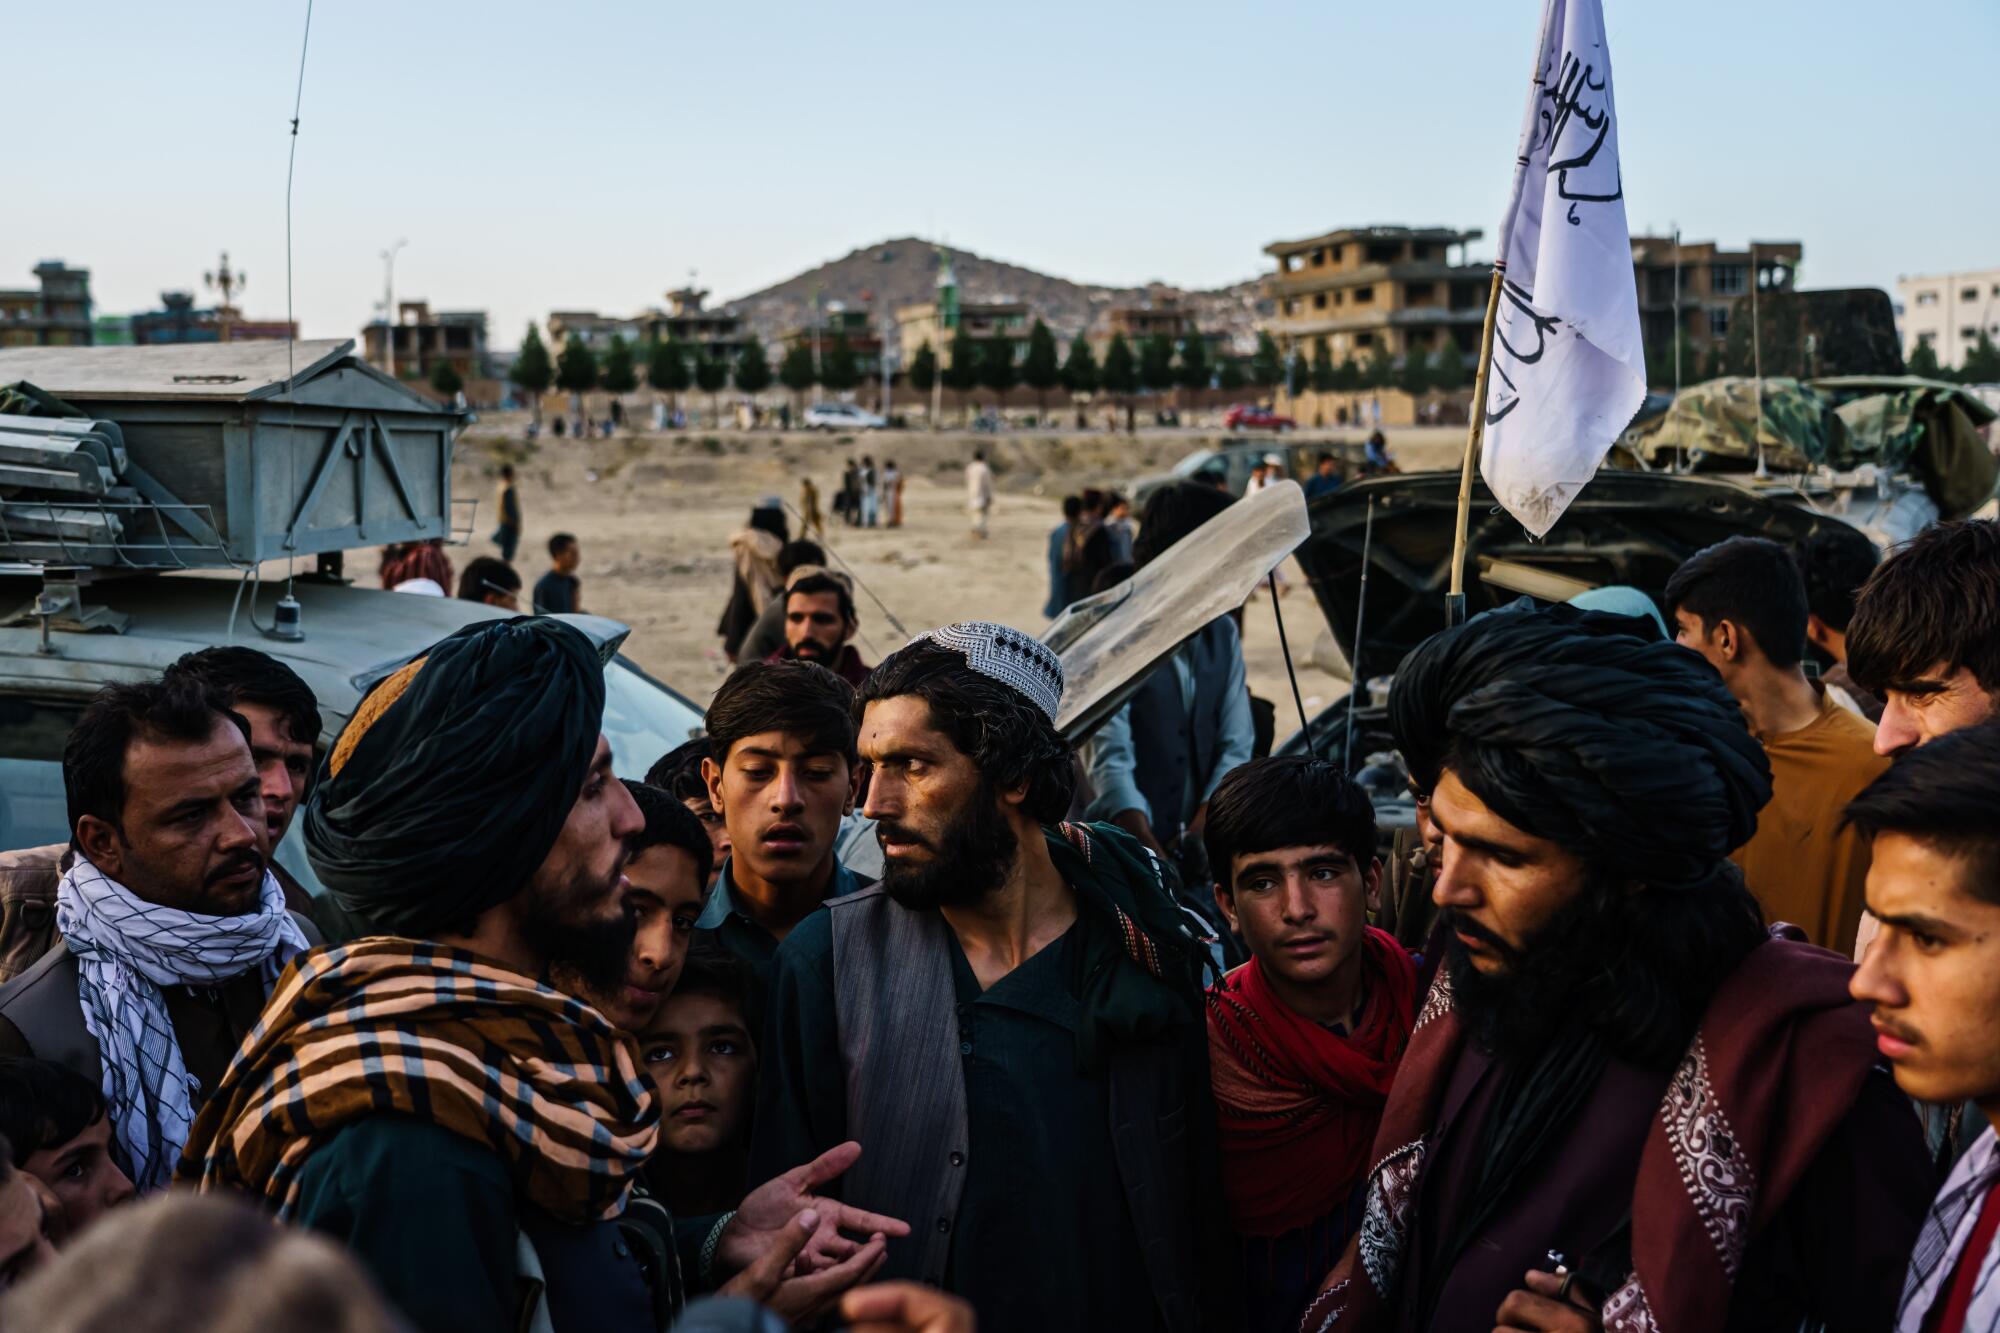 Taliban fighters gather in the outskirts of Kabul